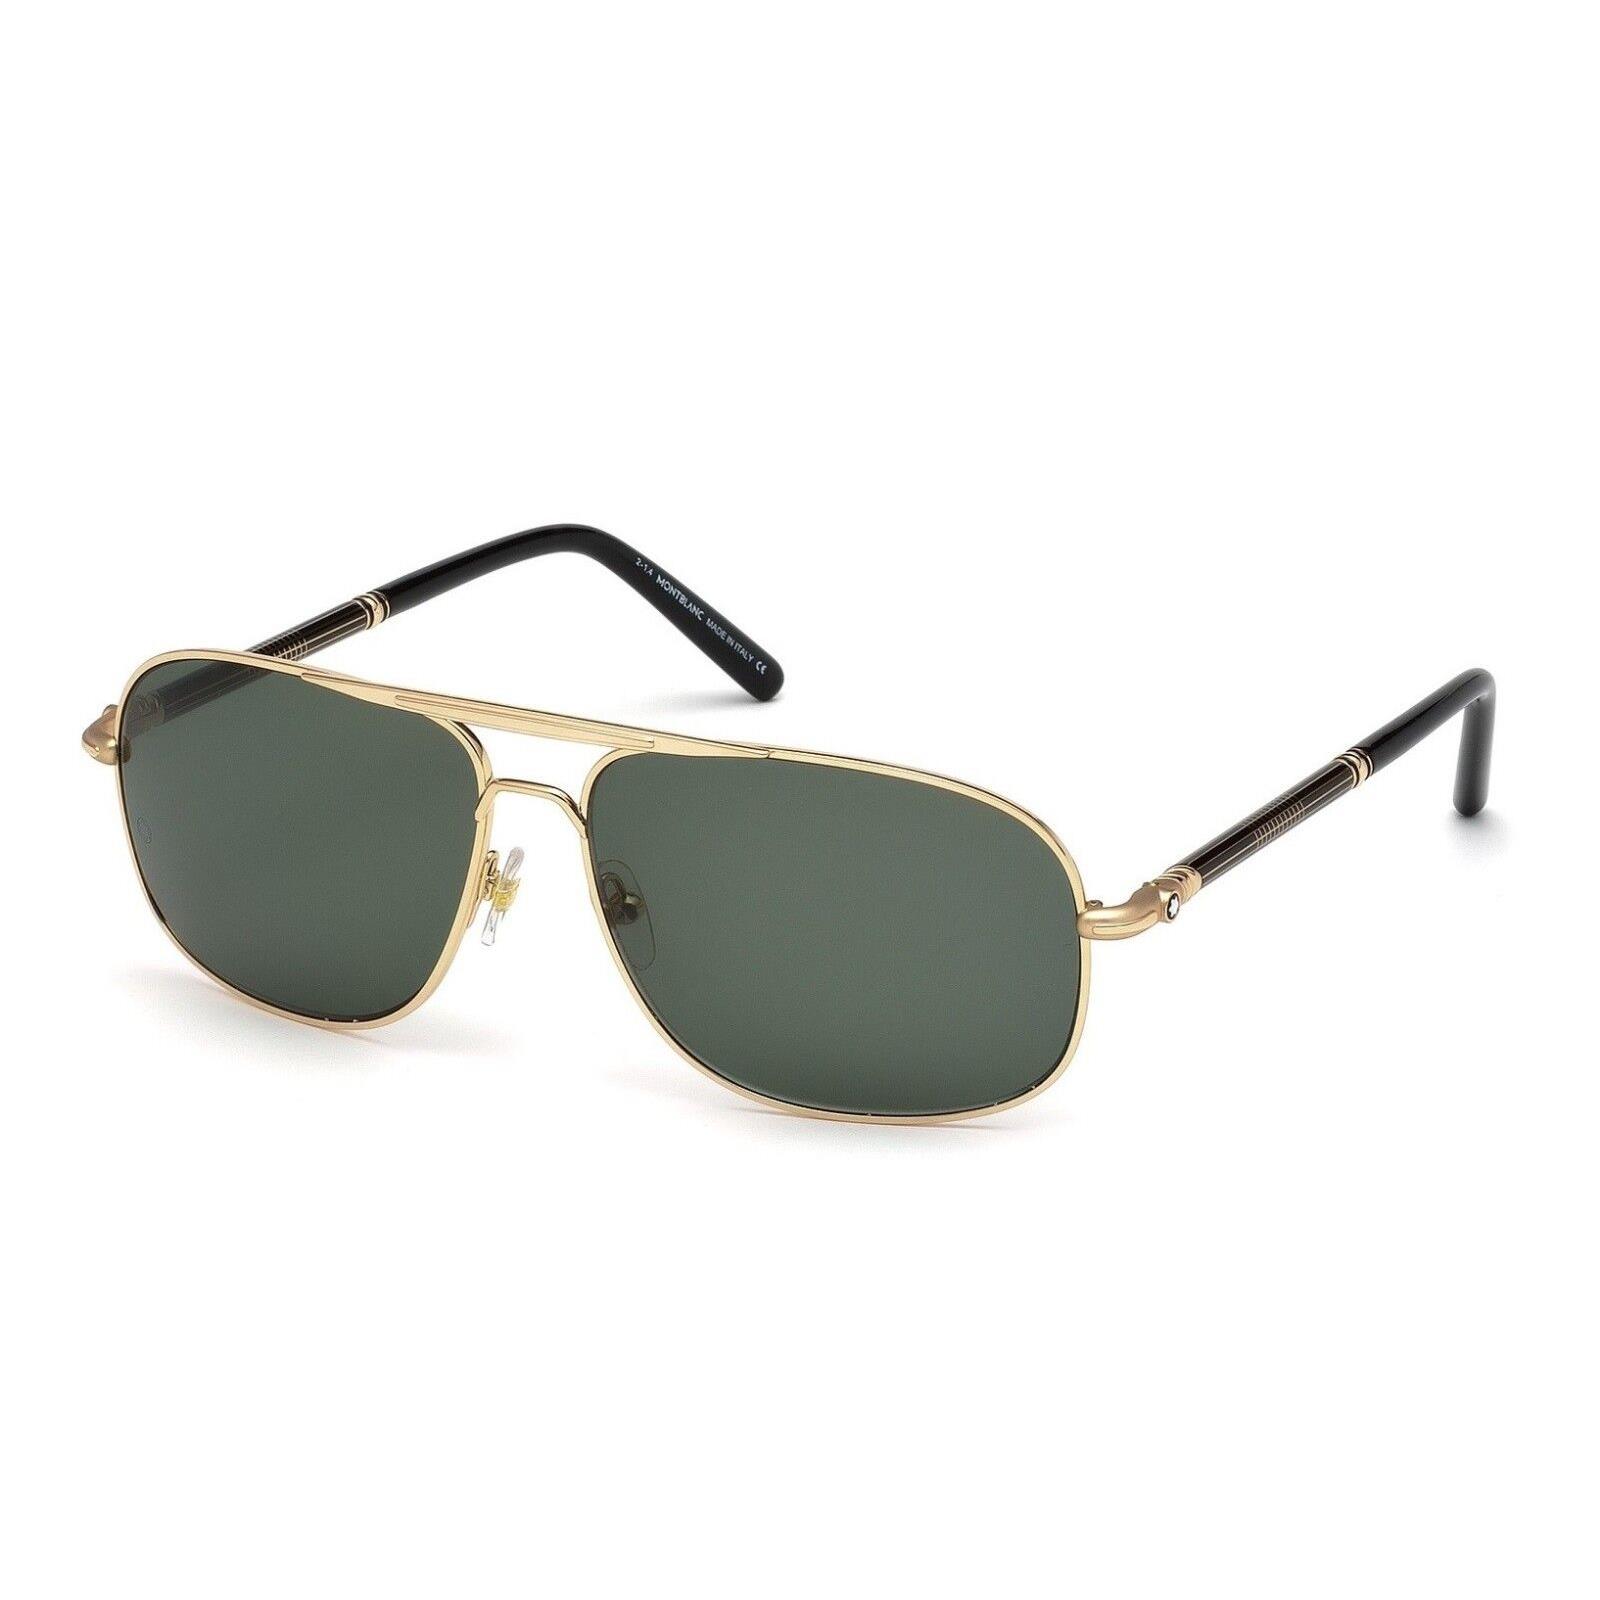 Montblanc MB513S 30N Aviator UV Protected Shades Sunglasses